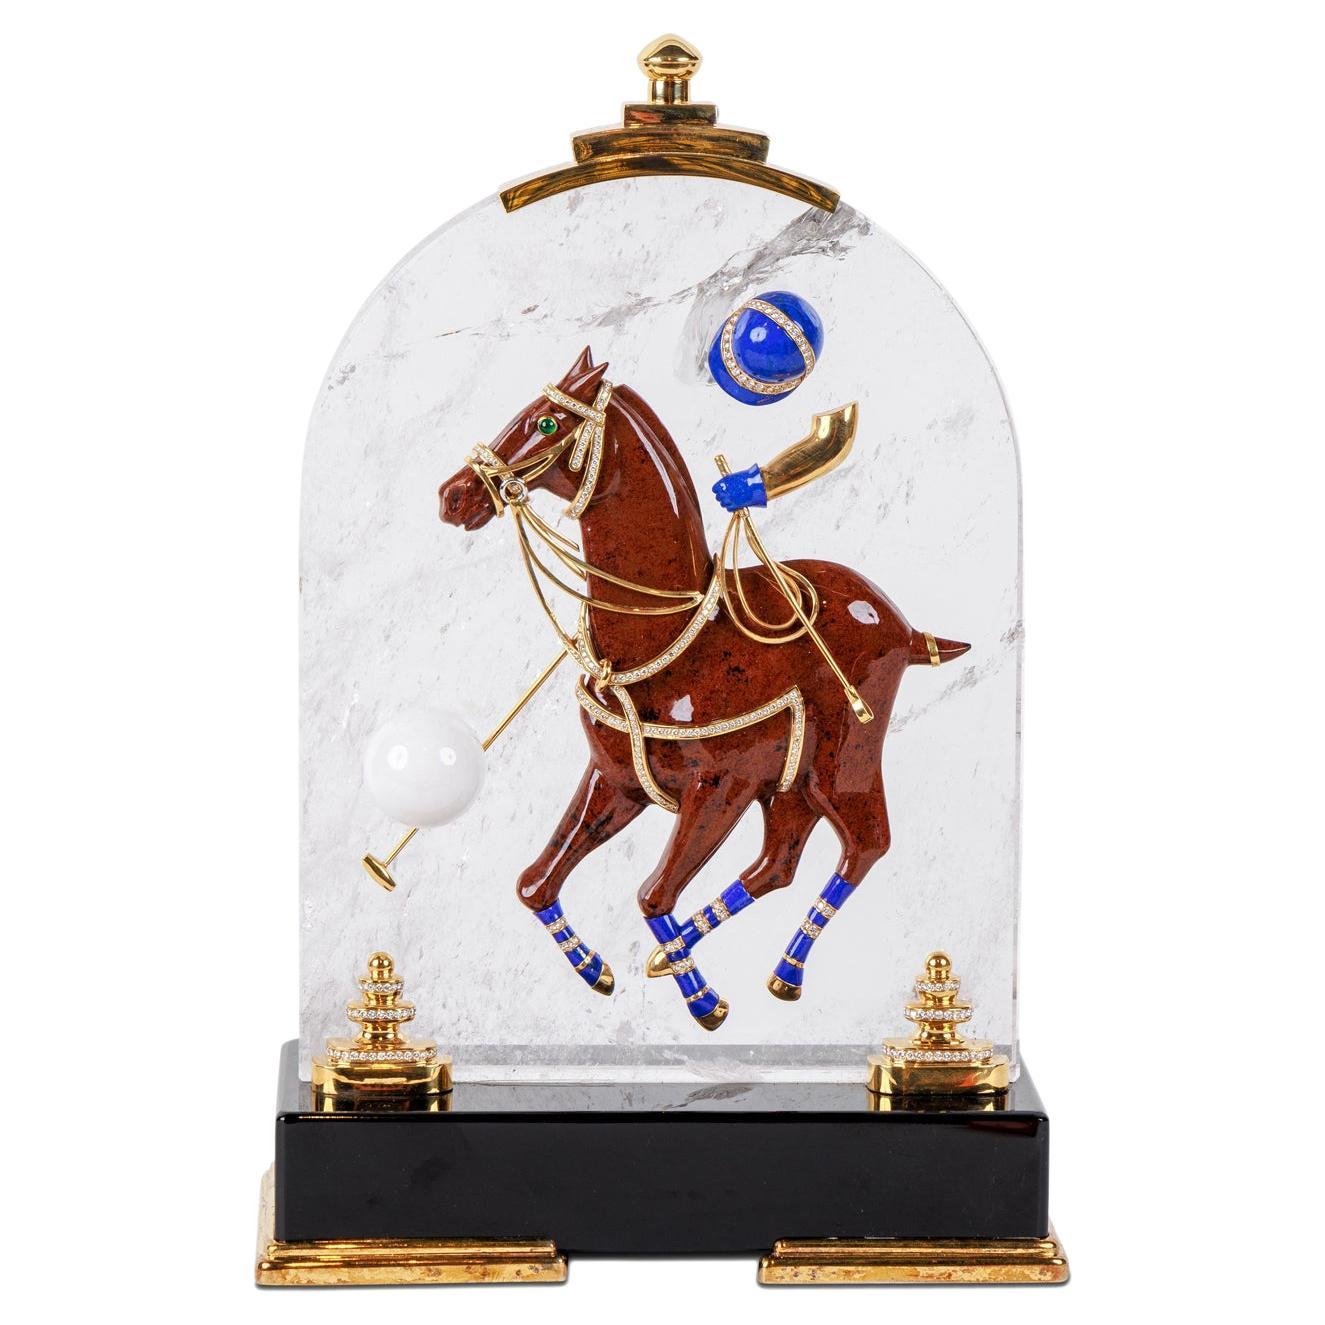 Mellerio Paris, French Gold, Diamonds, Silver, Lapis, and Obsidian Polo Player For Sale